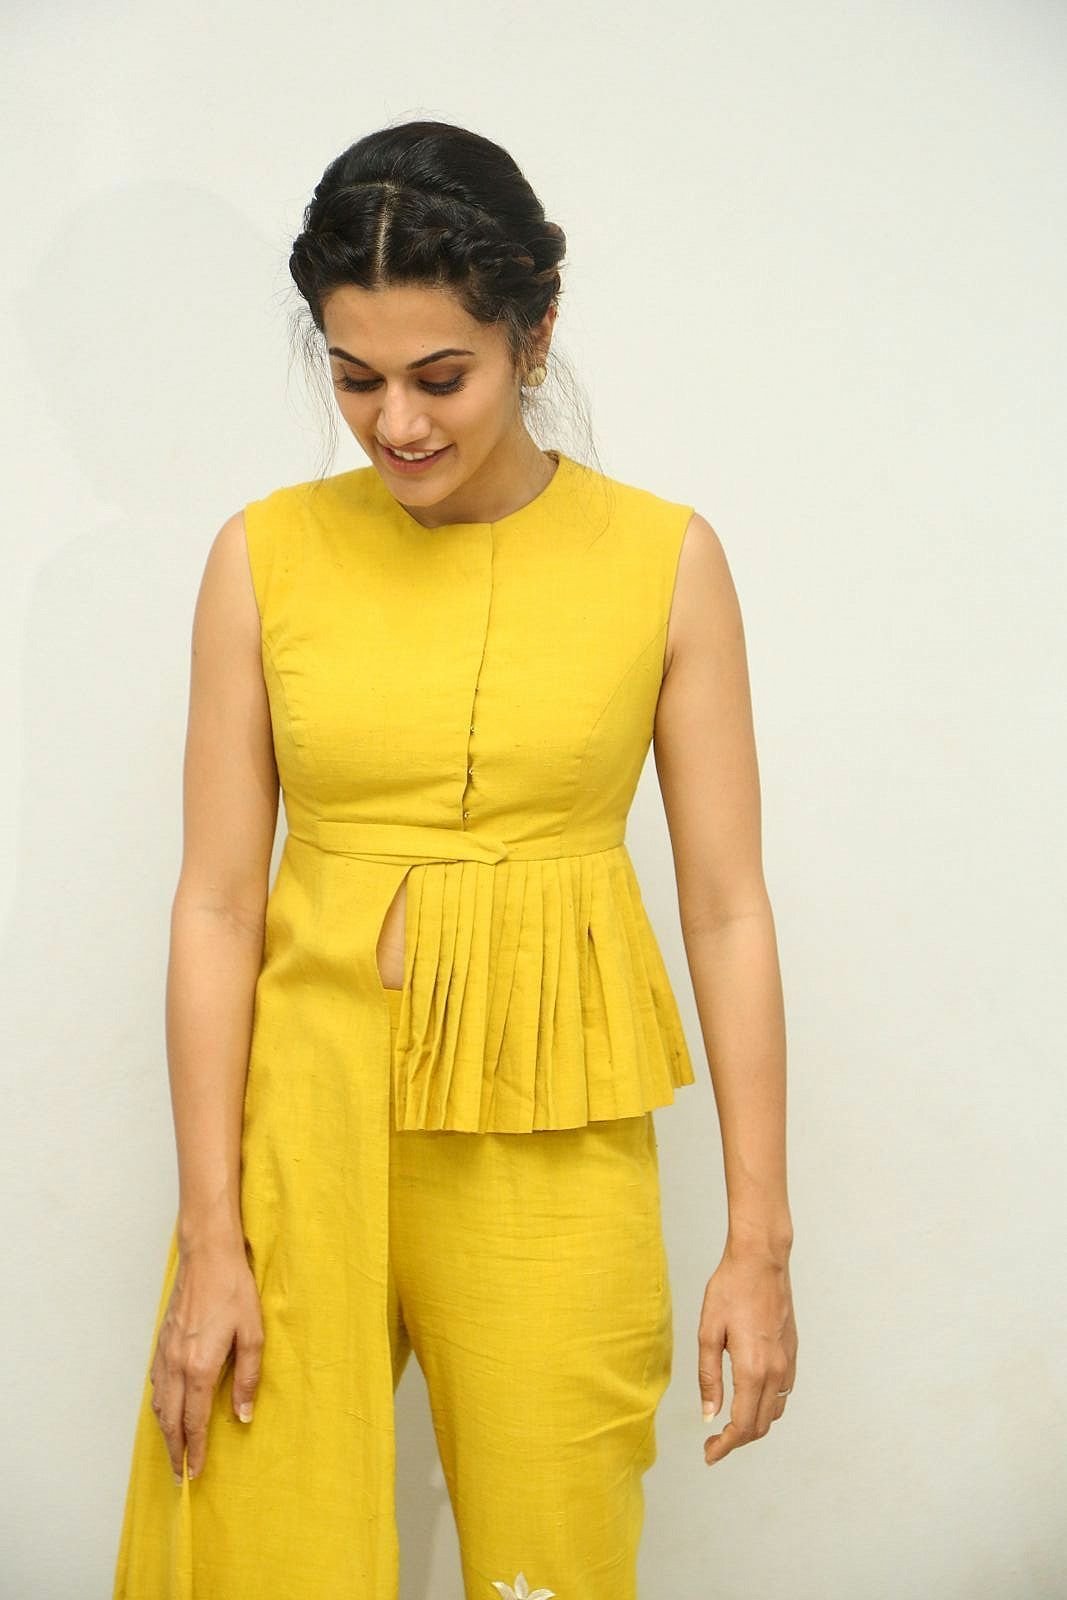 Taapsee Pannu at Anando Brahma Movie Motion Poster Launch Photos | Picture 1500582